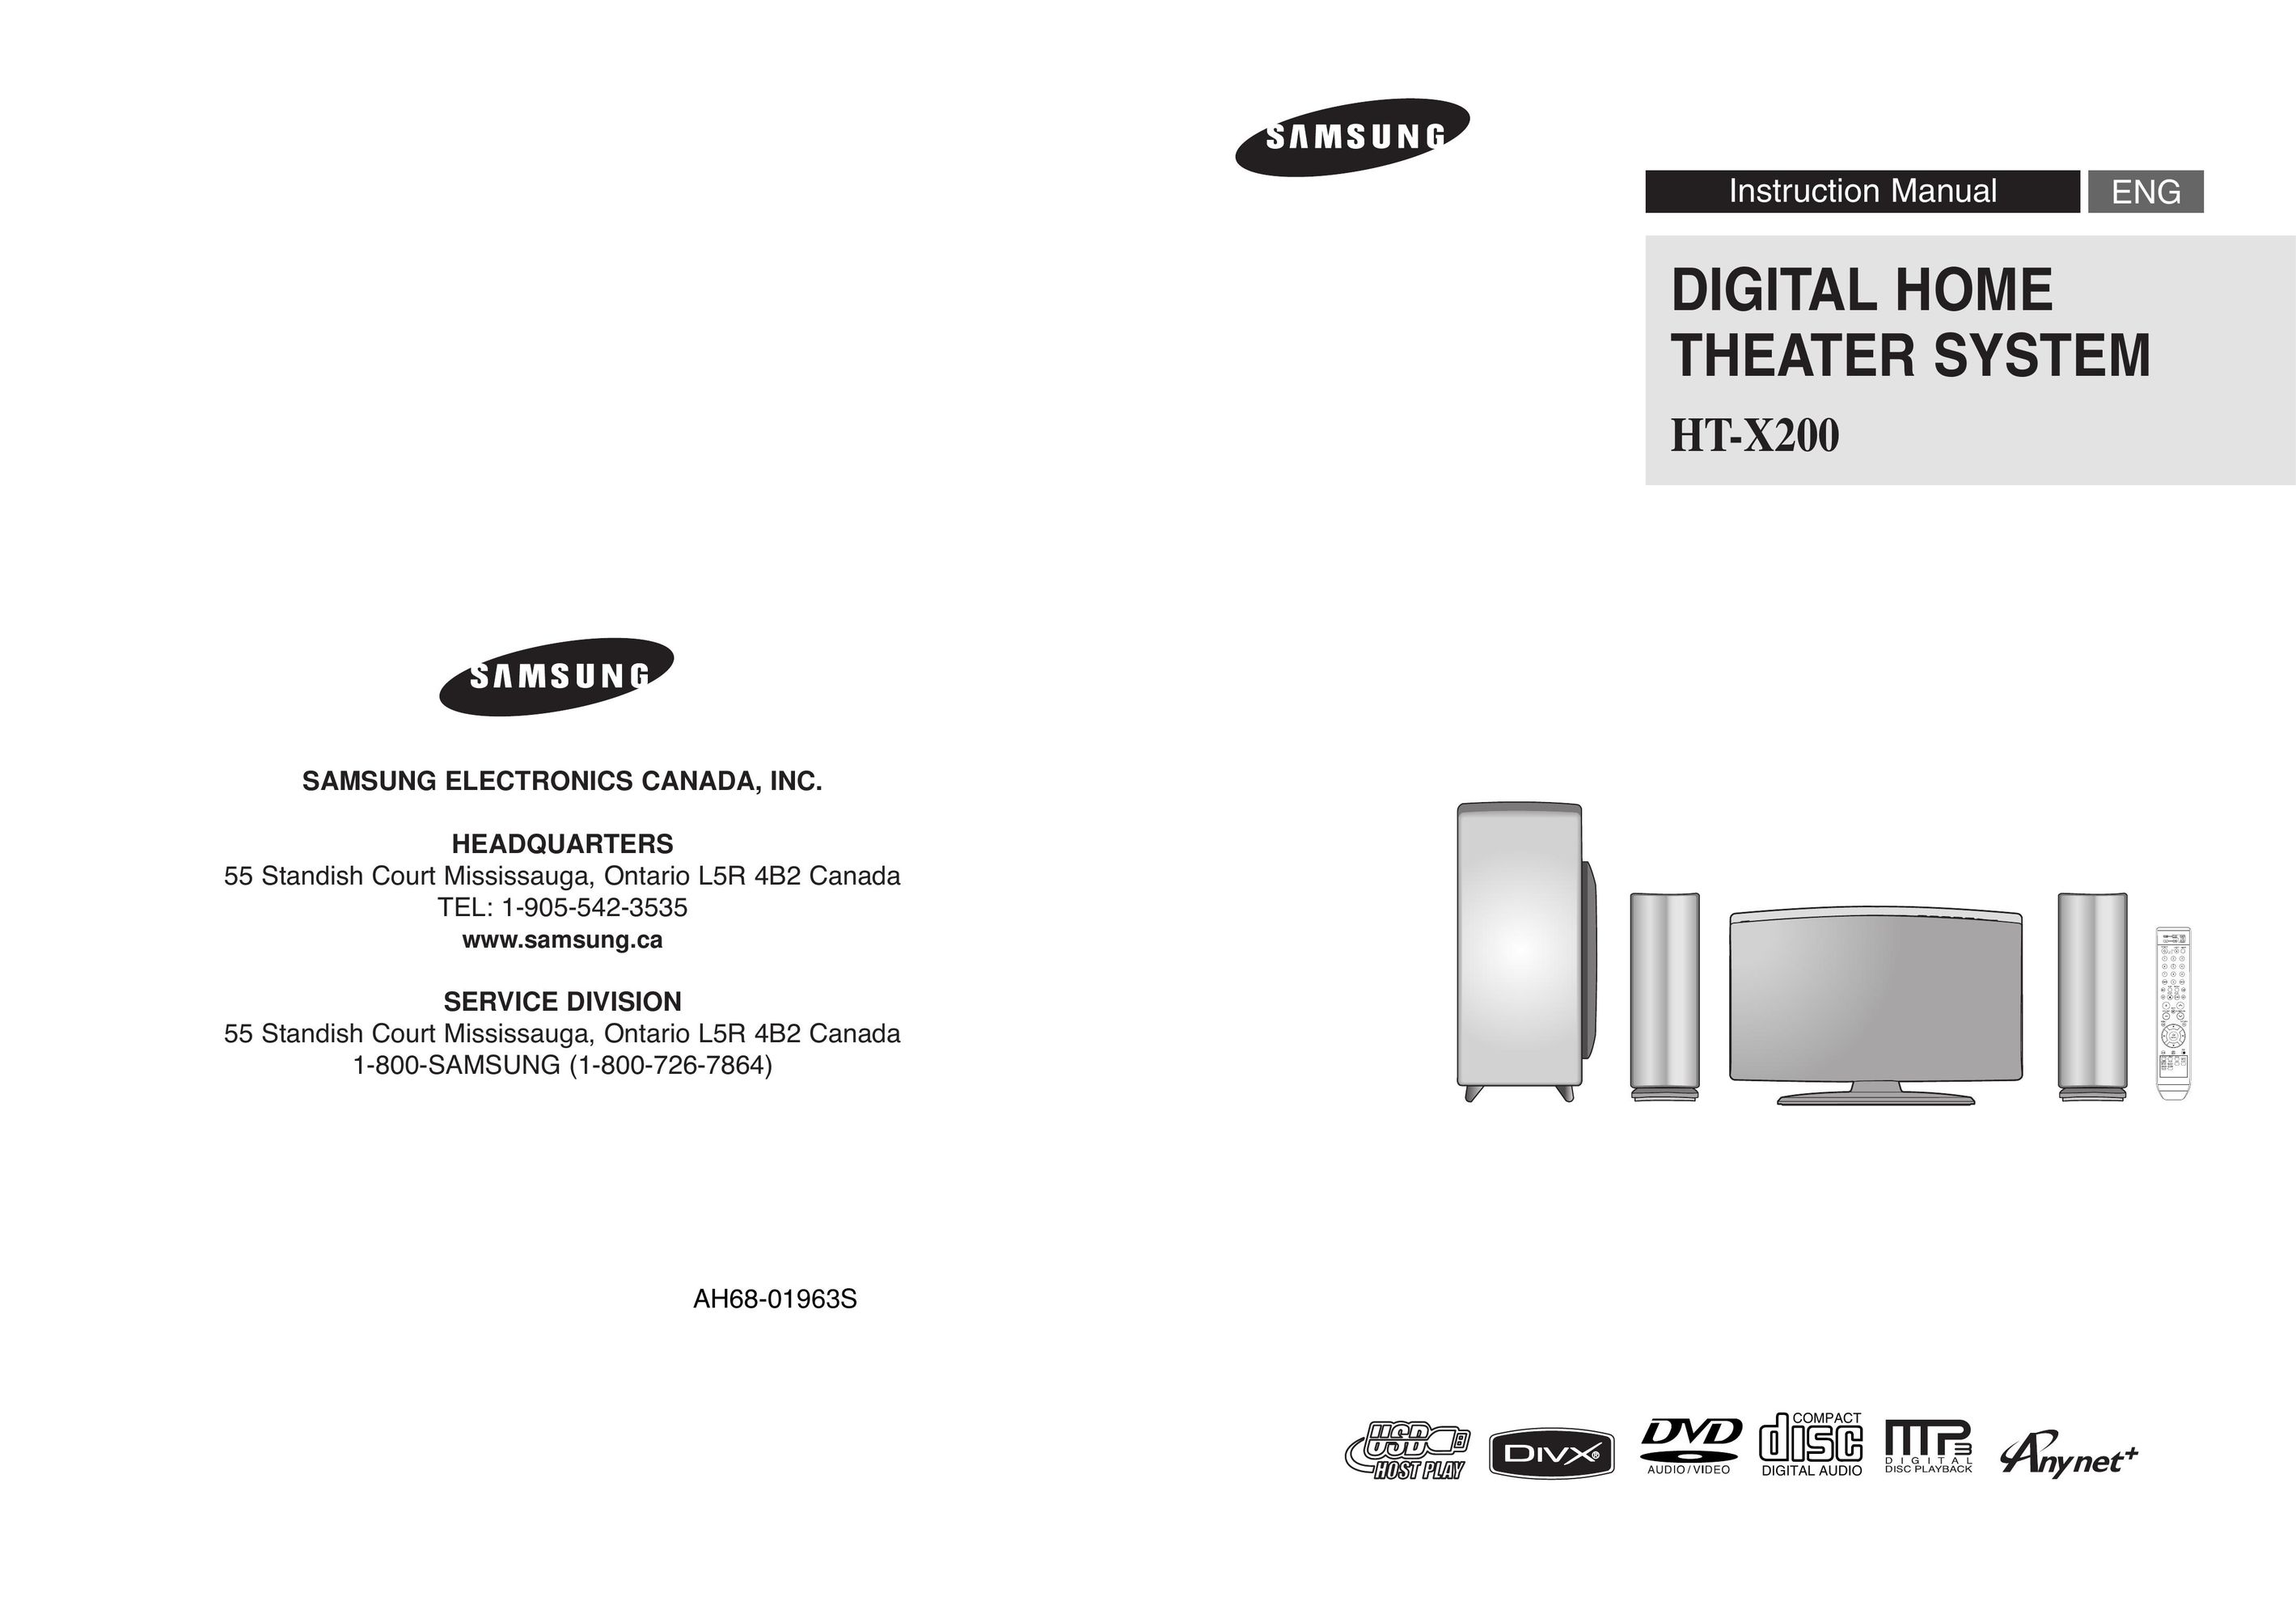 Samsung AH68-01943R Home Theater System User Manual